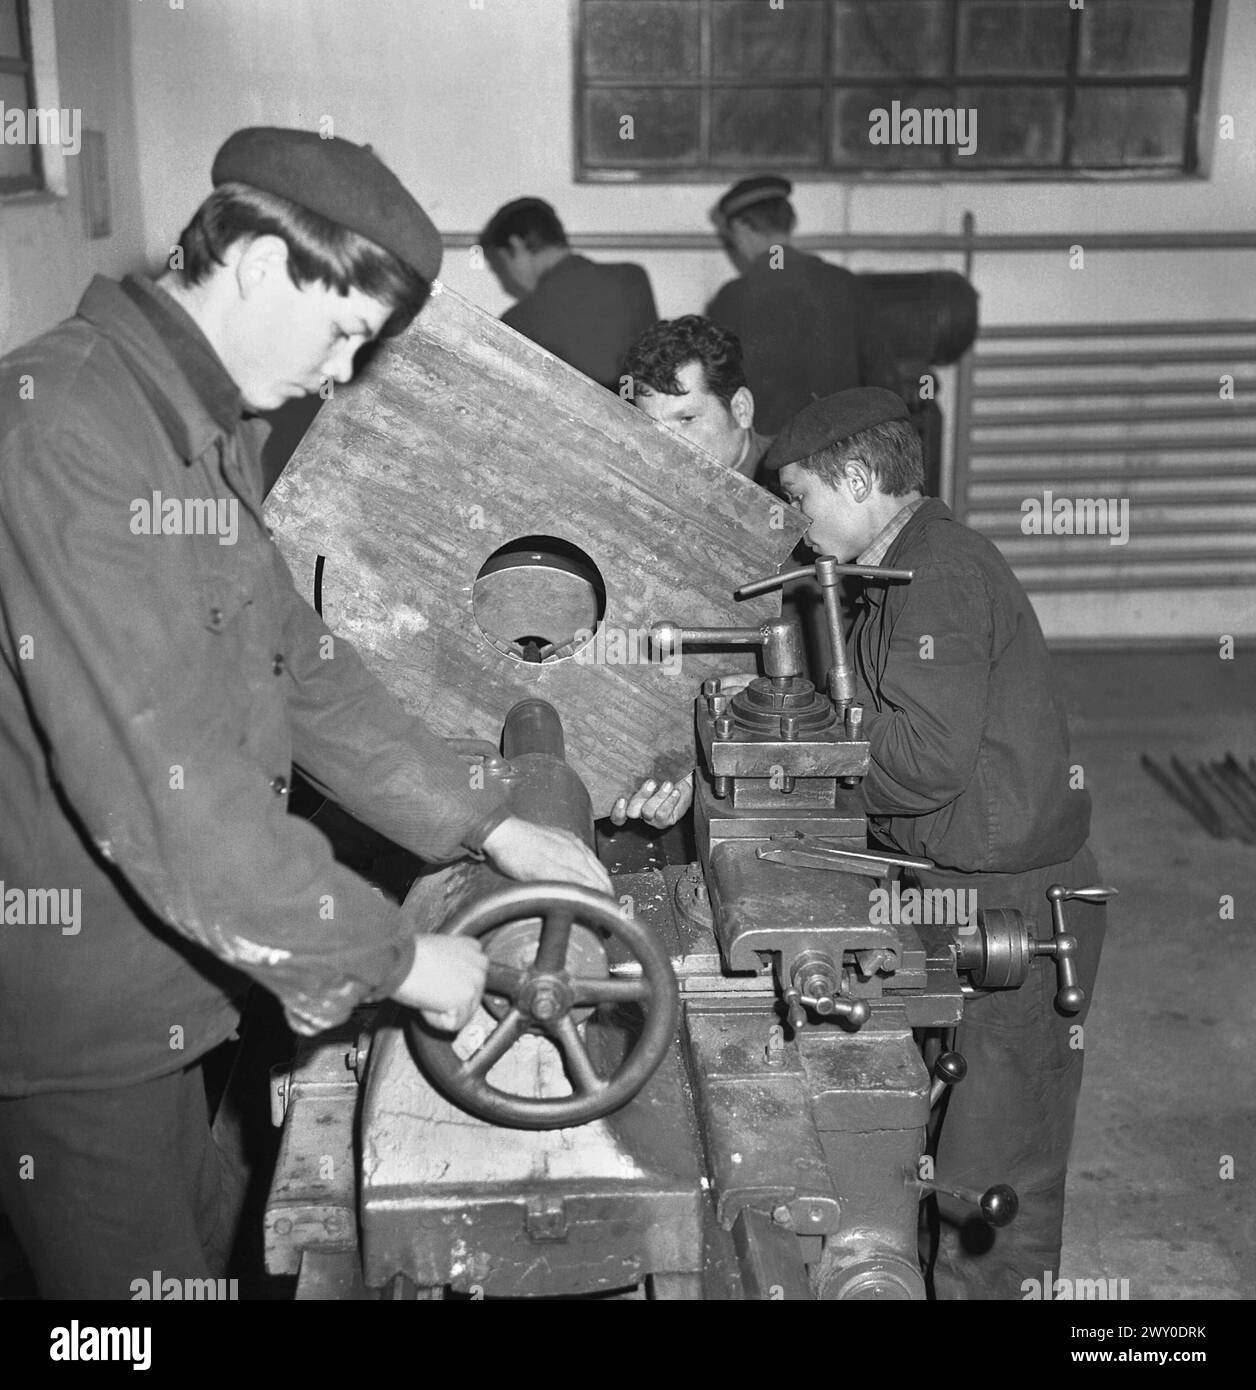 Socialist Republic of Romania in the 1970s. Students learning how to operate a lathe in a state-owned workshop. Stock Photo